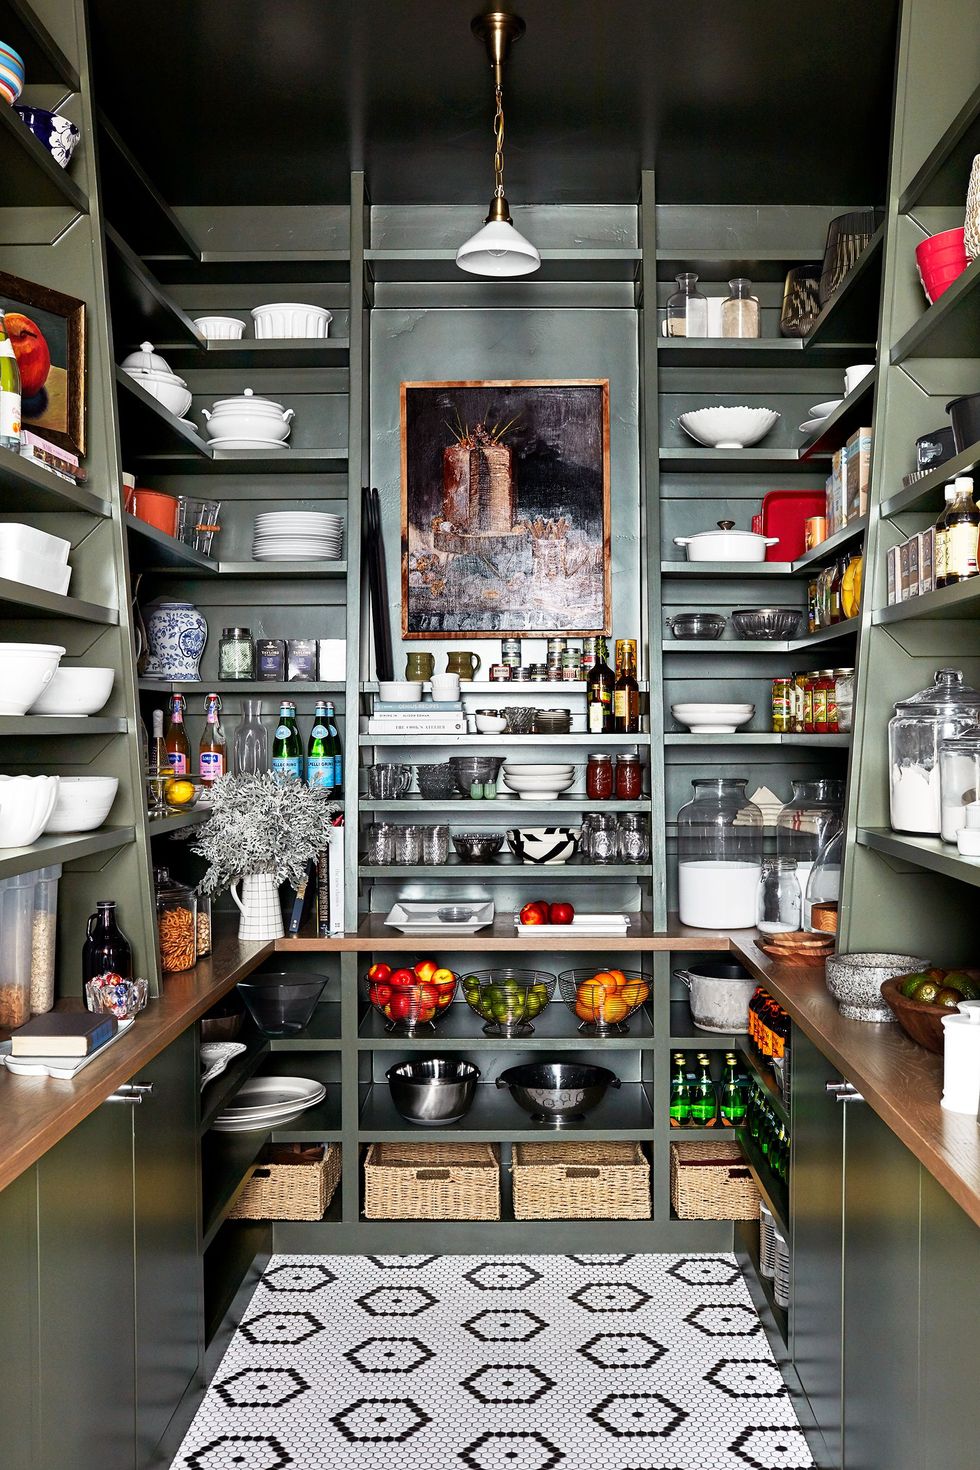 How To Organize A Walk-In Pantry In A Weekend